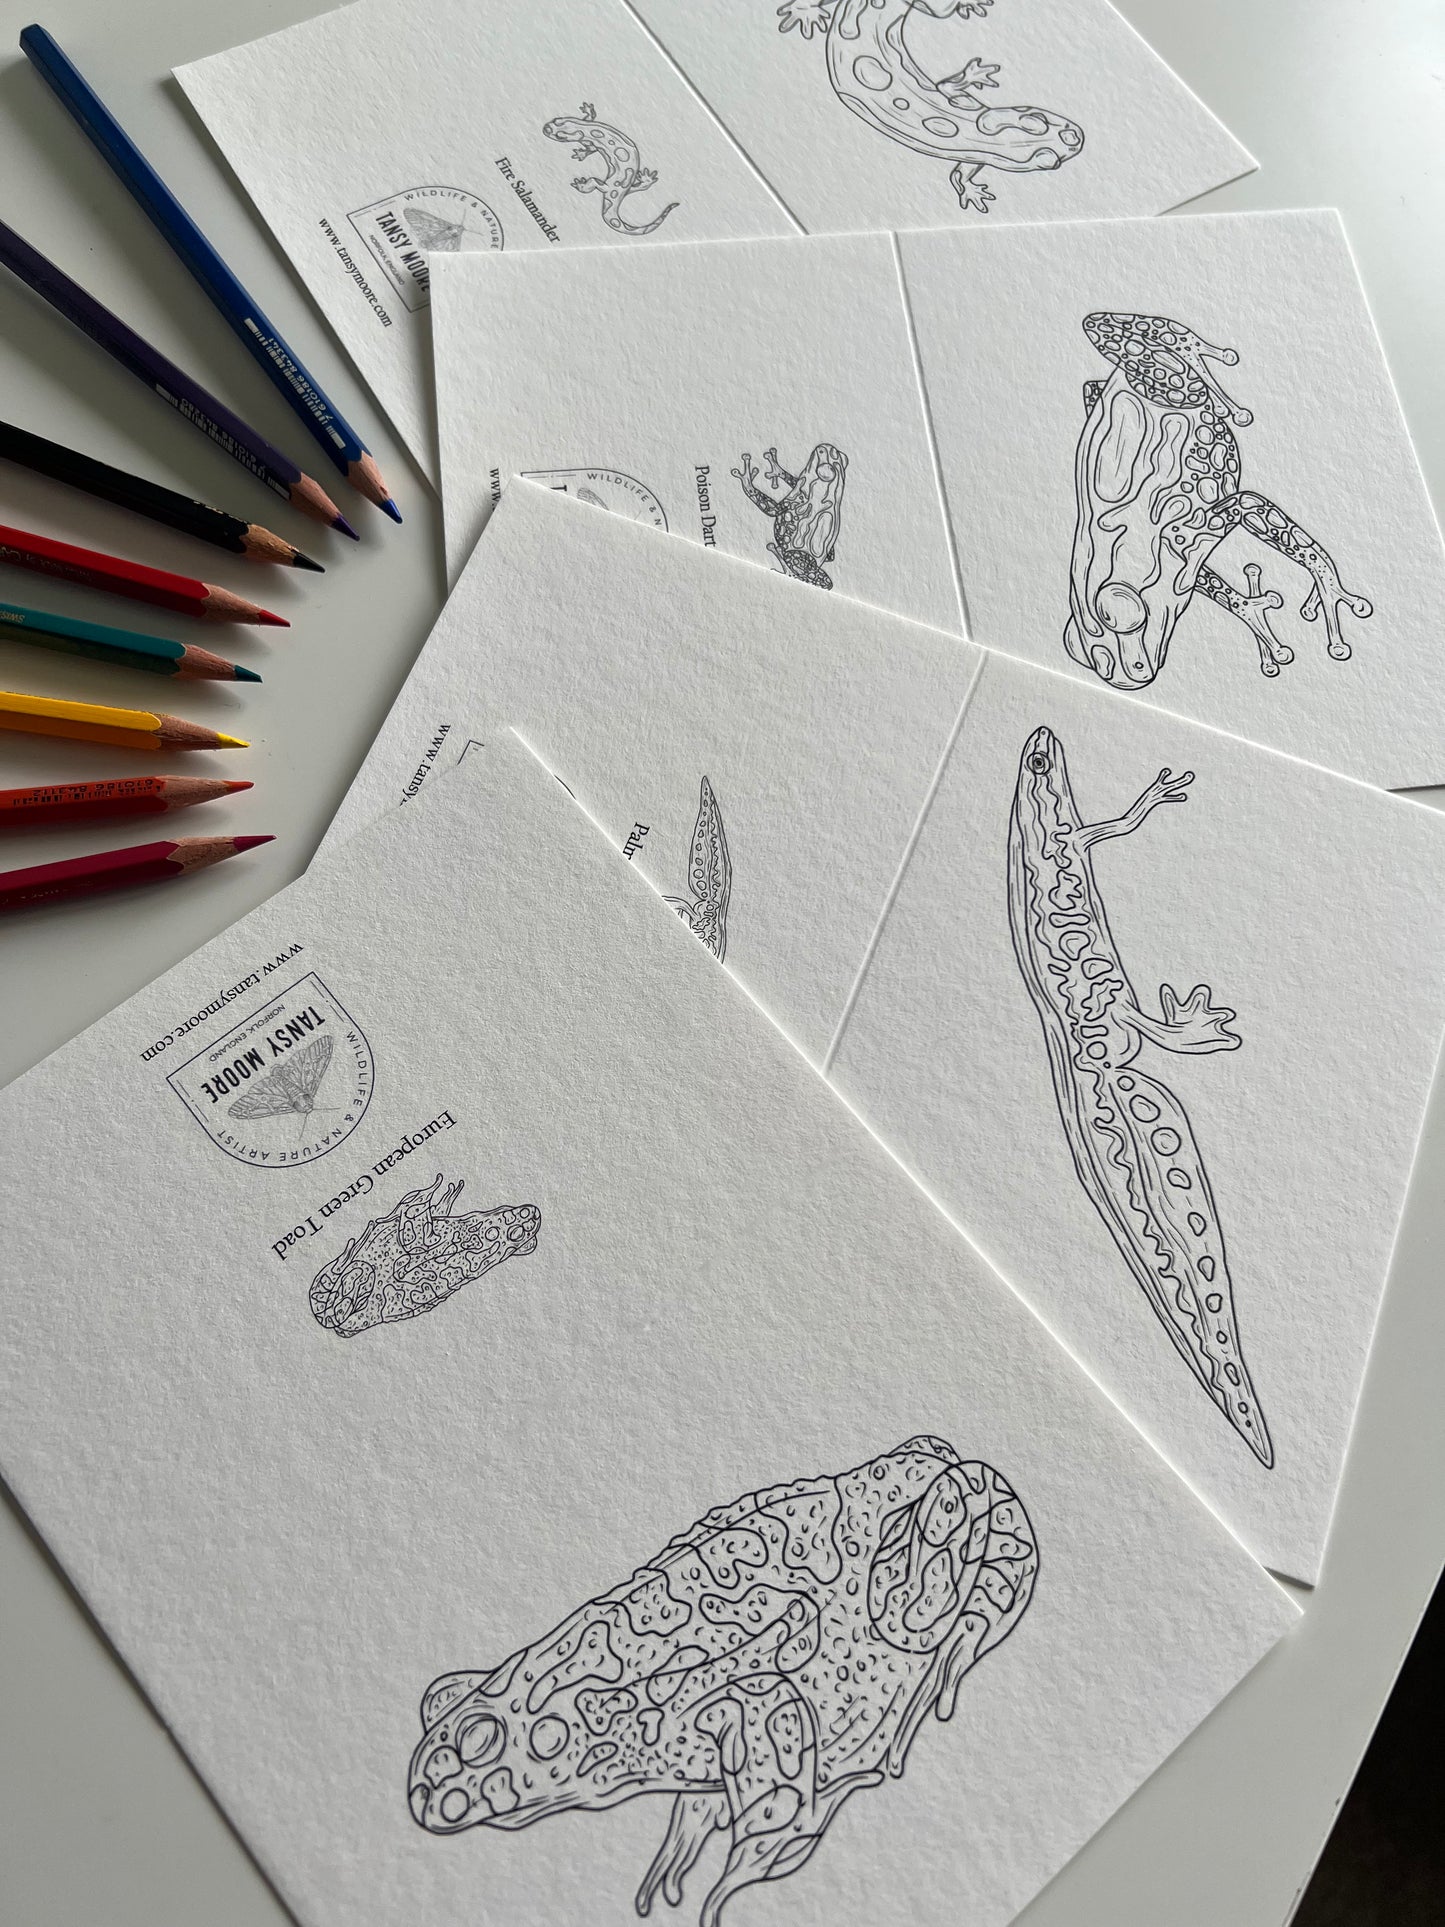 Amphibian Colouring in Card Set